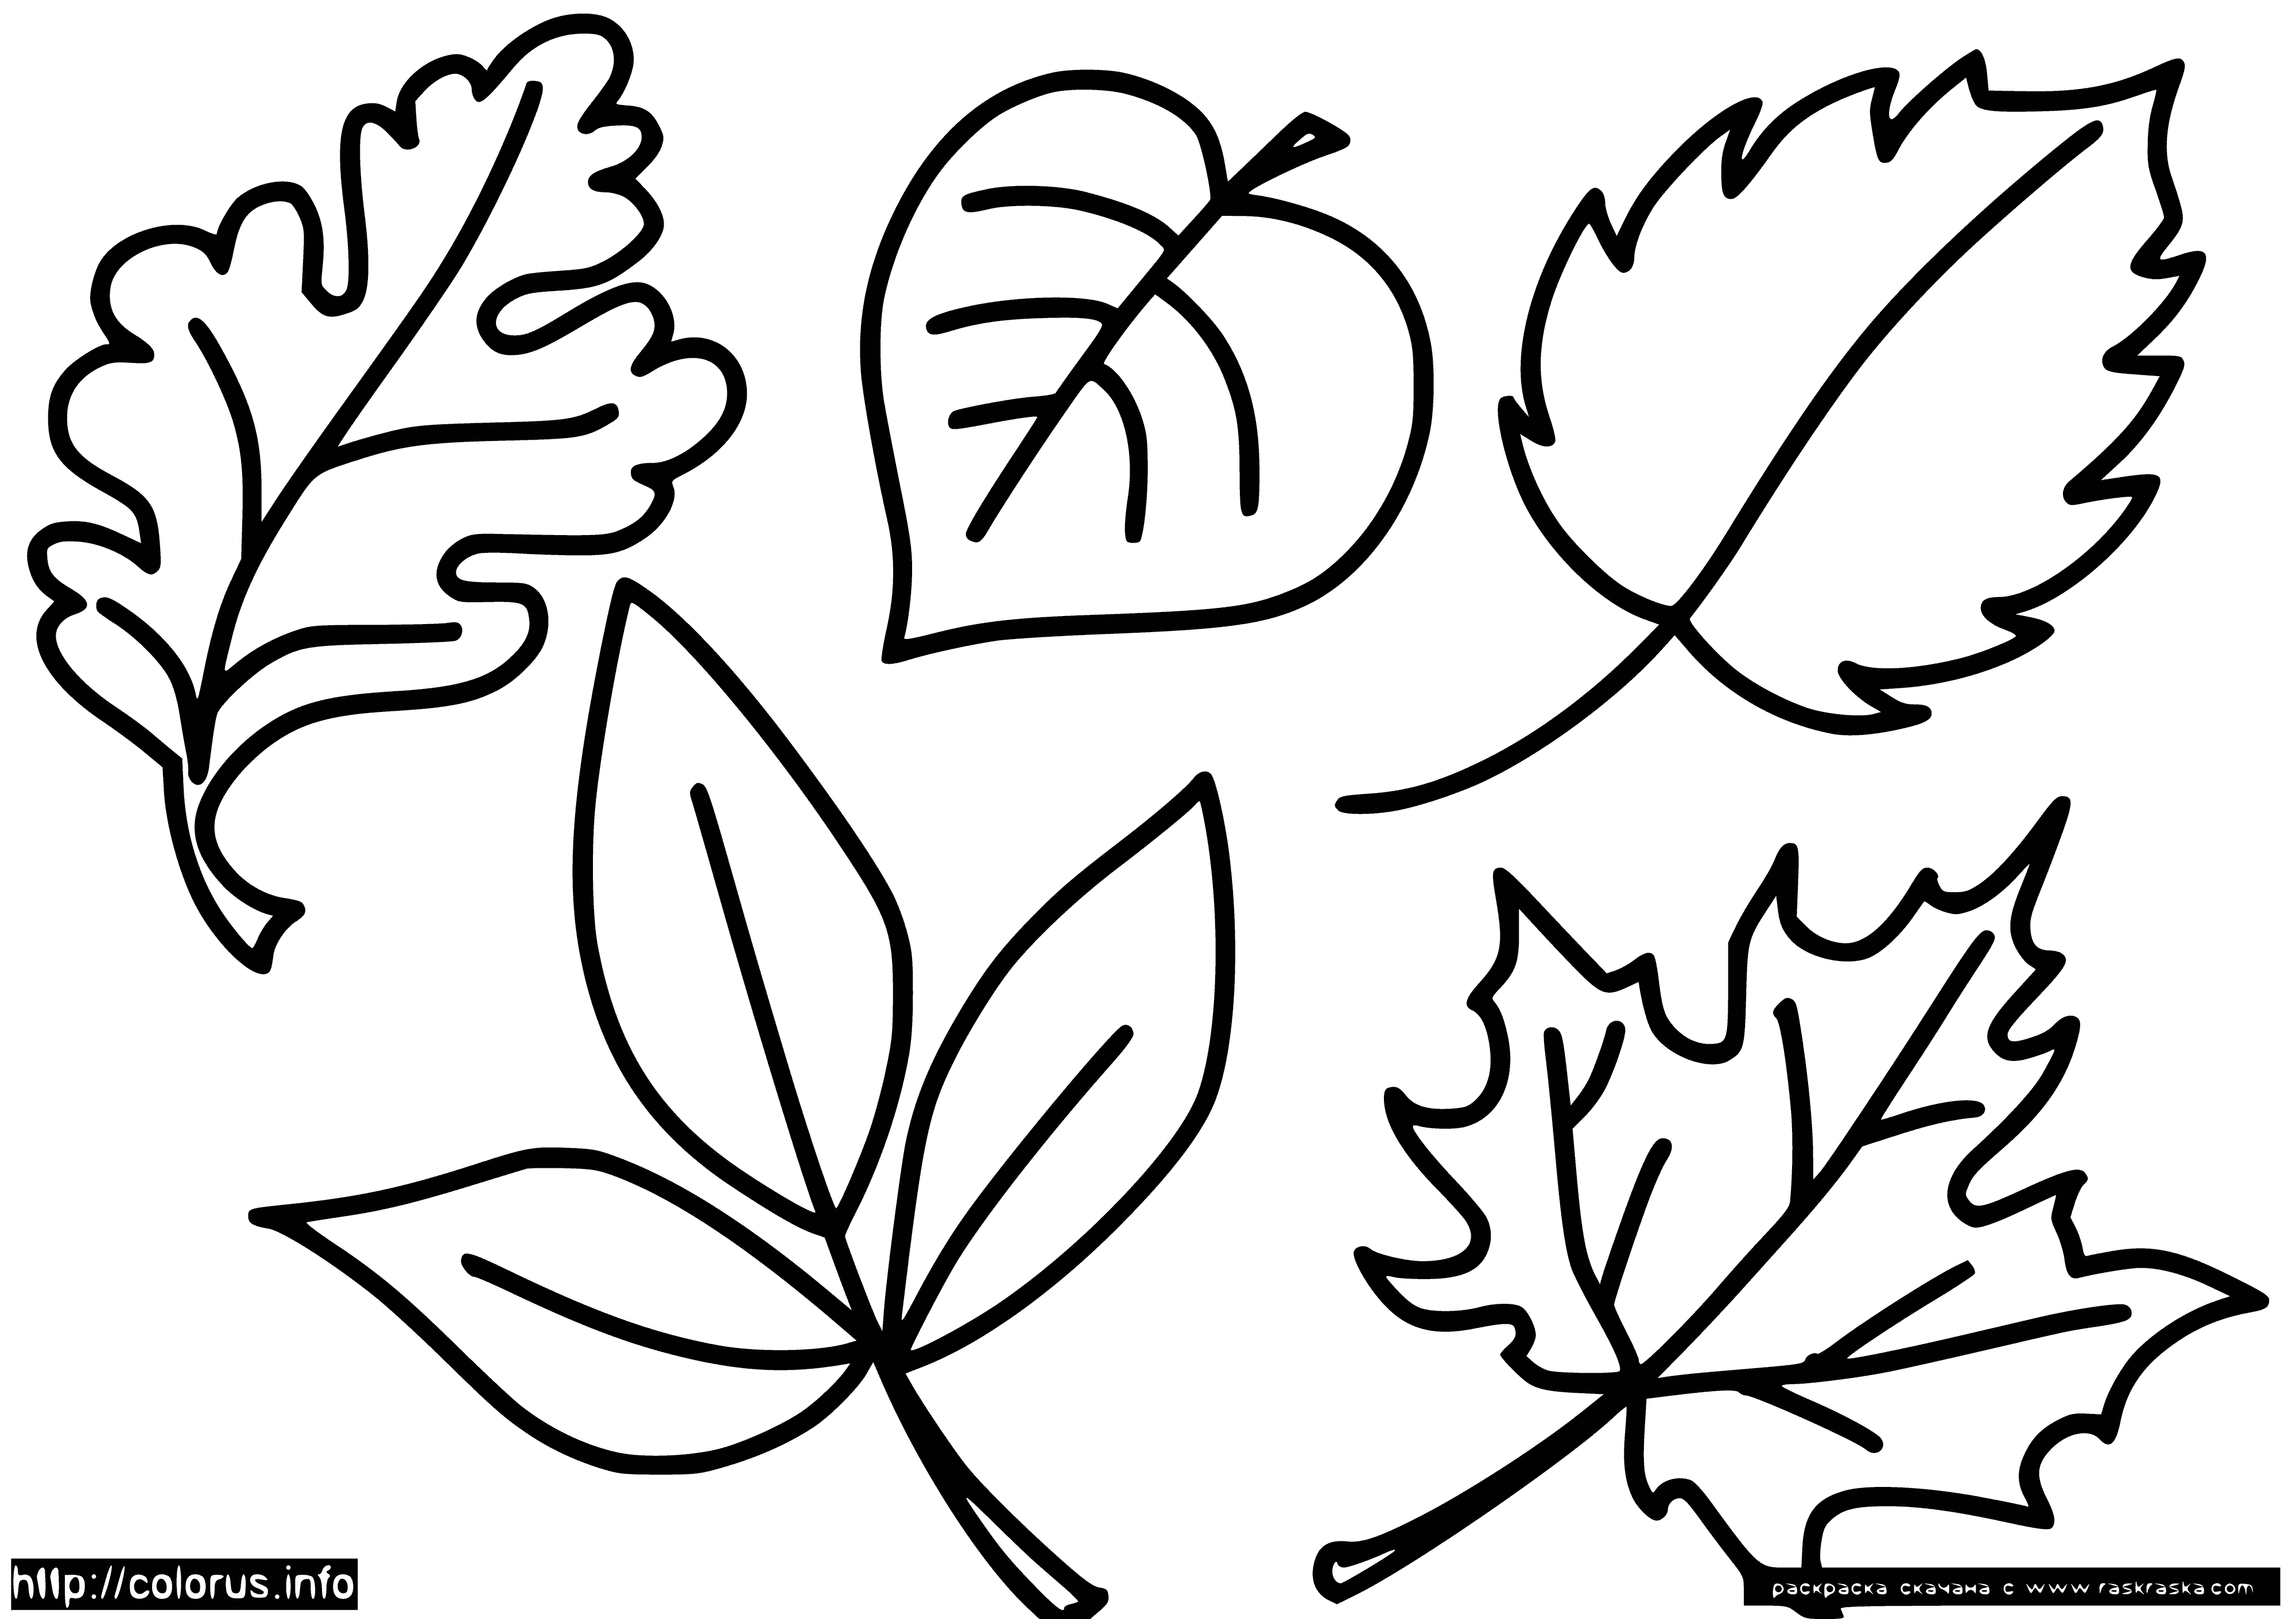 coloring page: Leaves of different colors fall from a tree: yellow, orange, and brown.